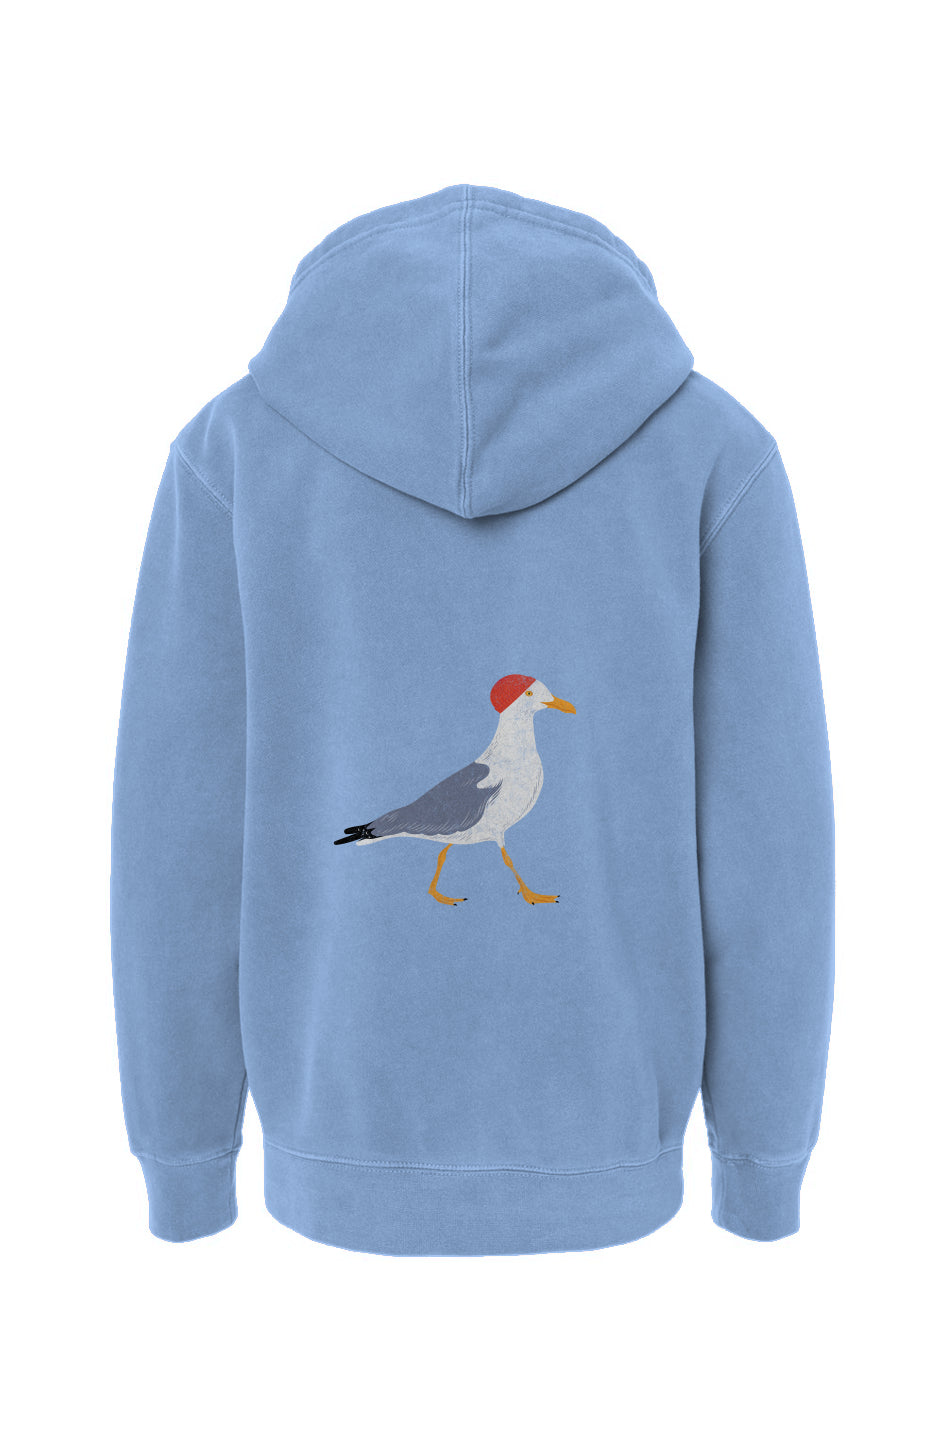 Steven SeaGull Youth Hoodie